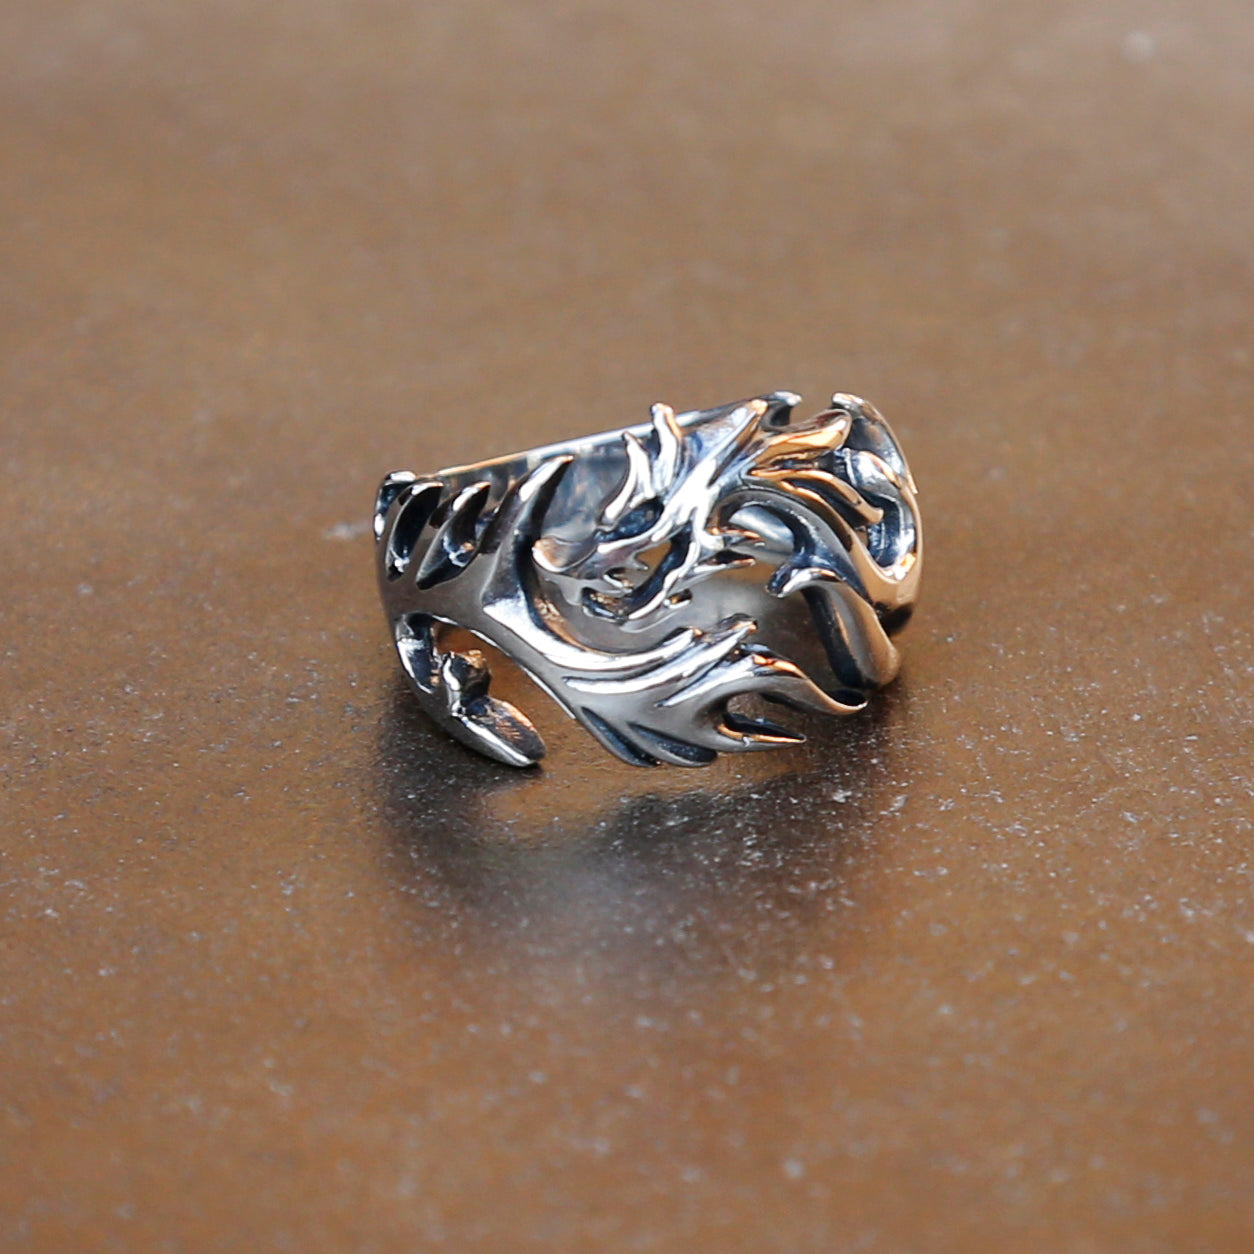 Dragon Adjustable Sterling Silver Mens Ring, Traditional Chinese Medit